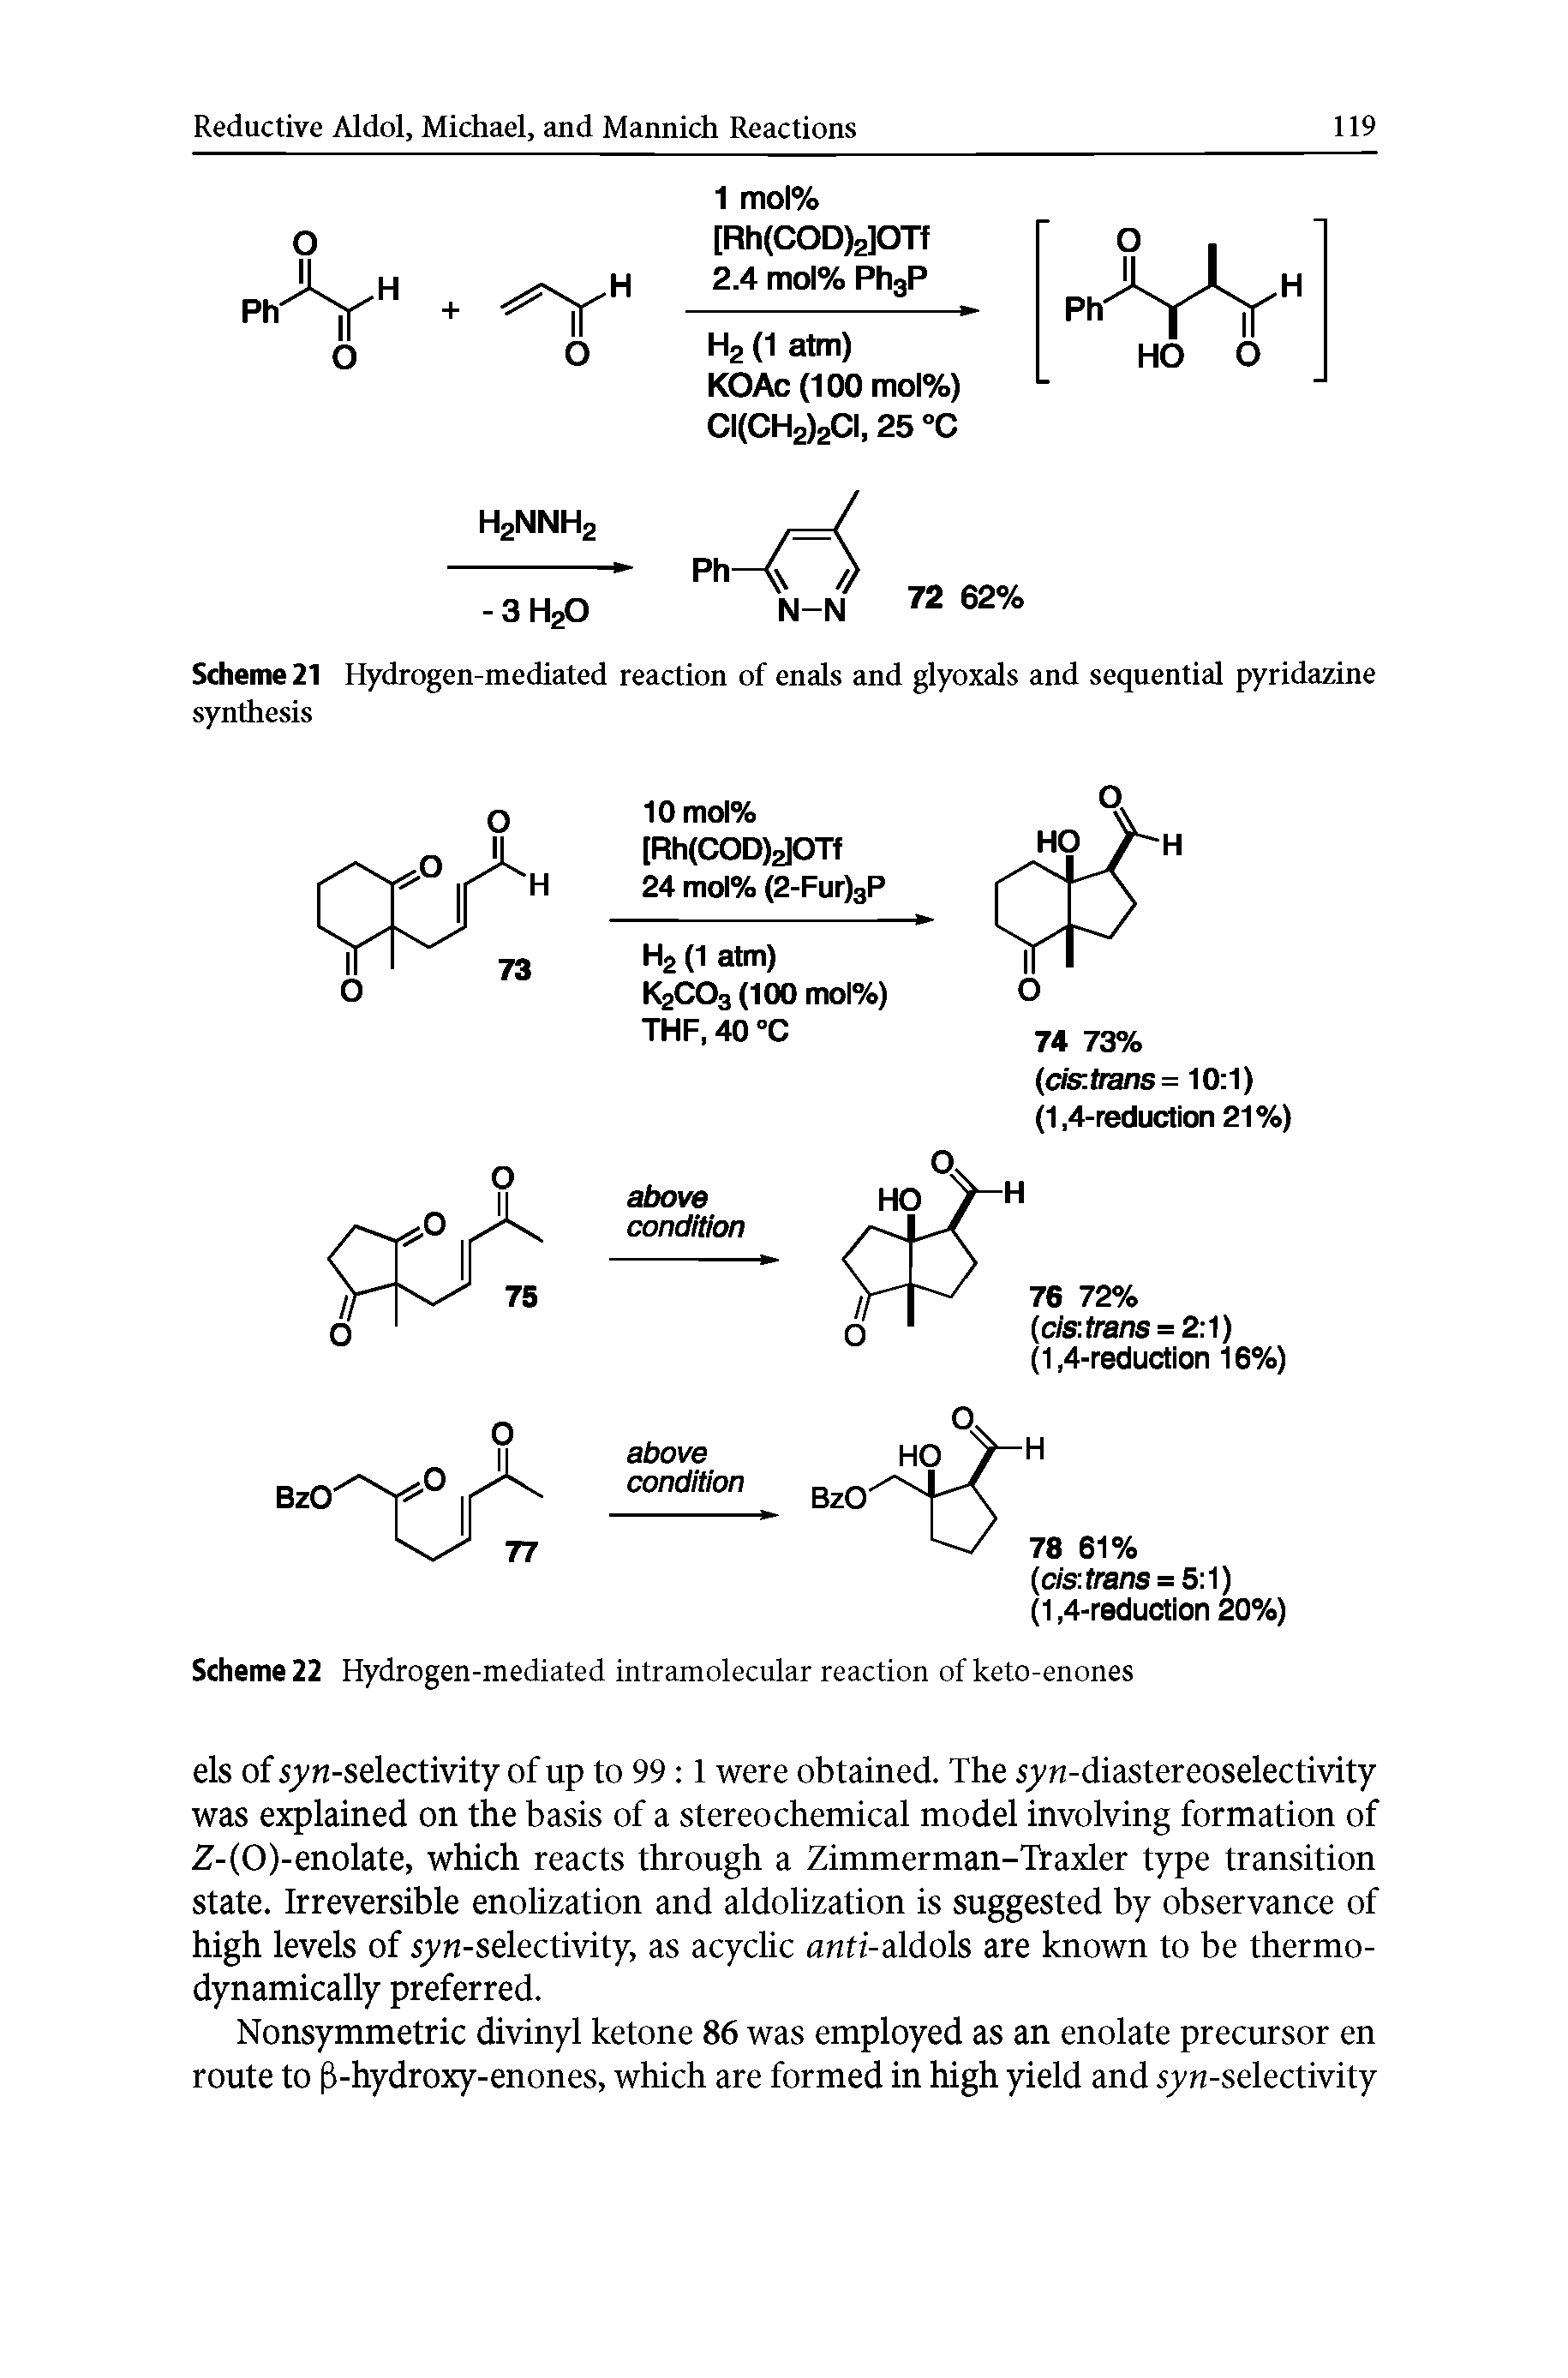 Scheme 21 Hydrogen-mediated reaction of enals and glyoxals and sequential pyridazine synthesis...